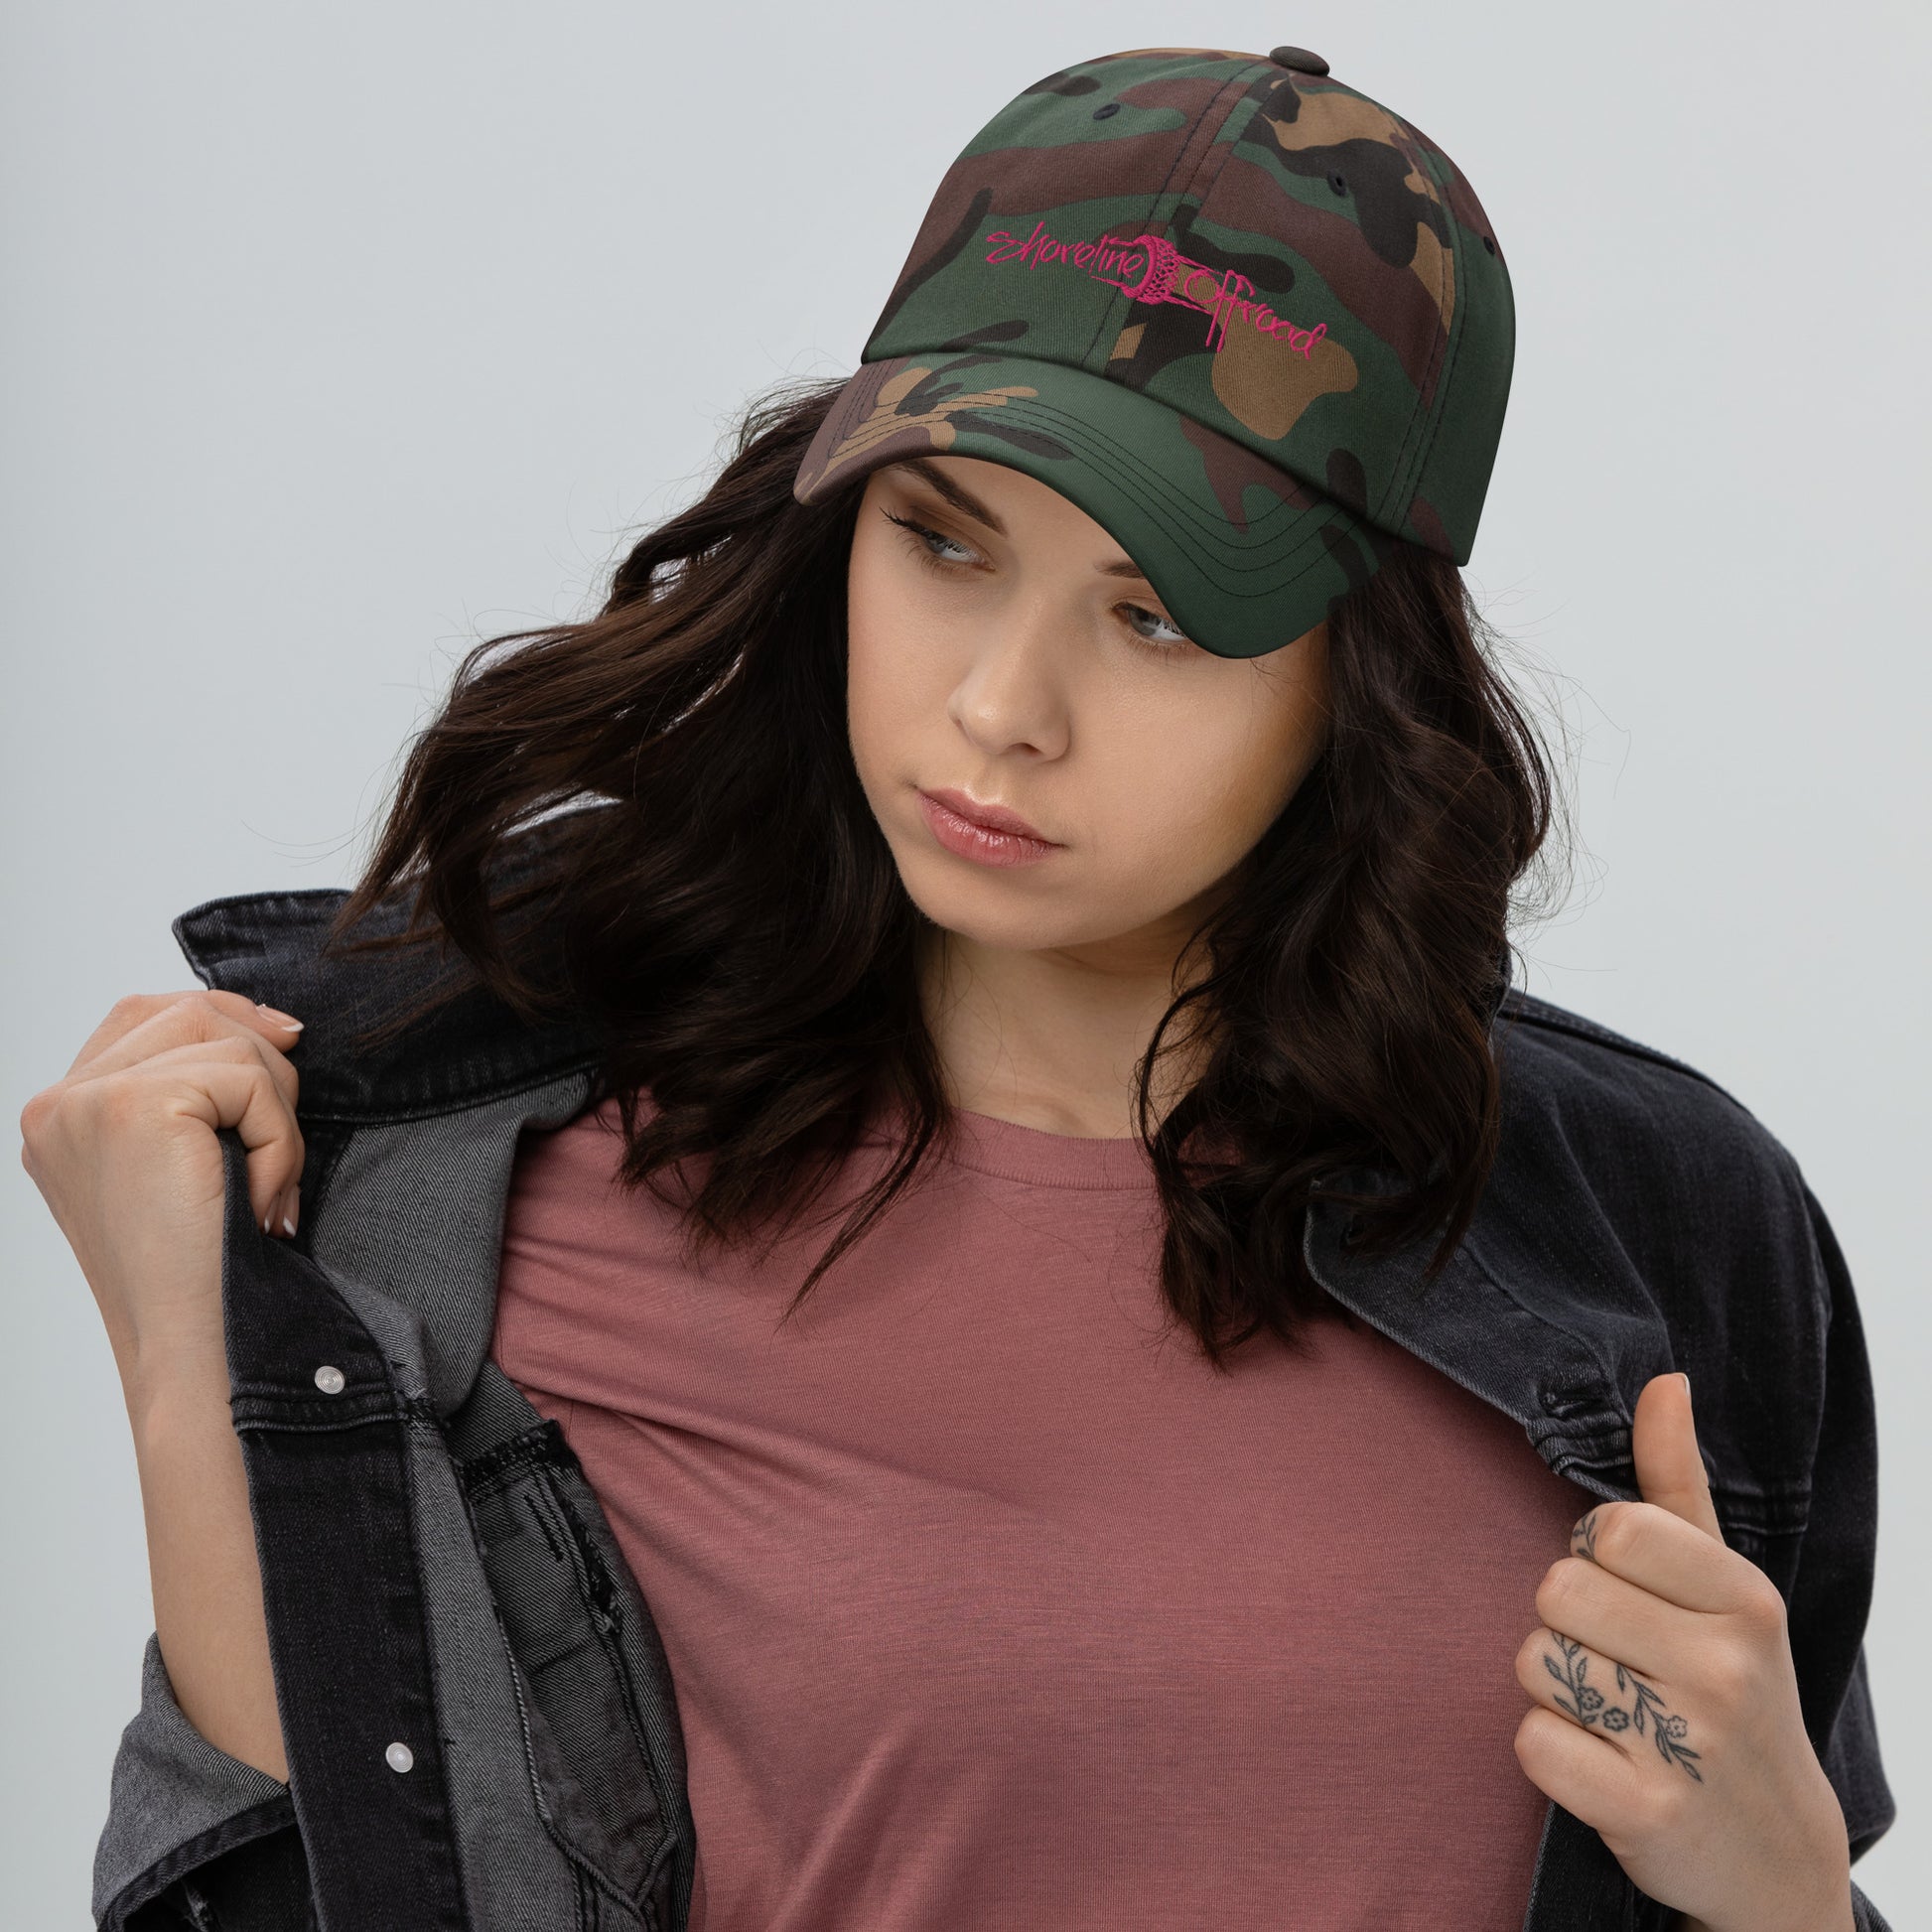 a woman wearing a camo hat and jacket